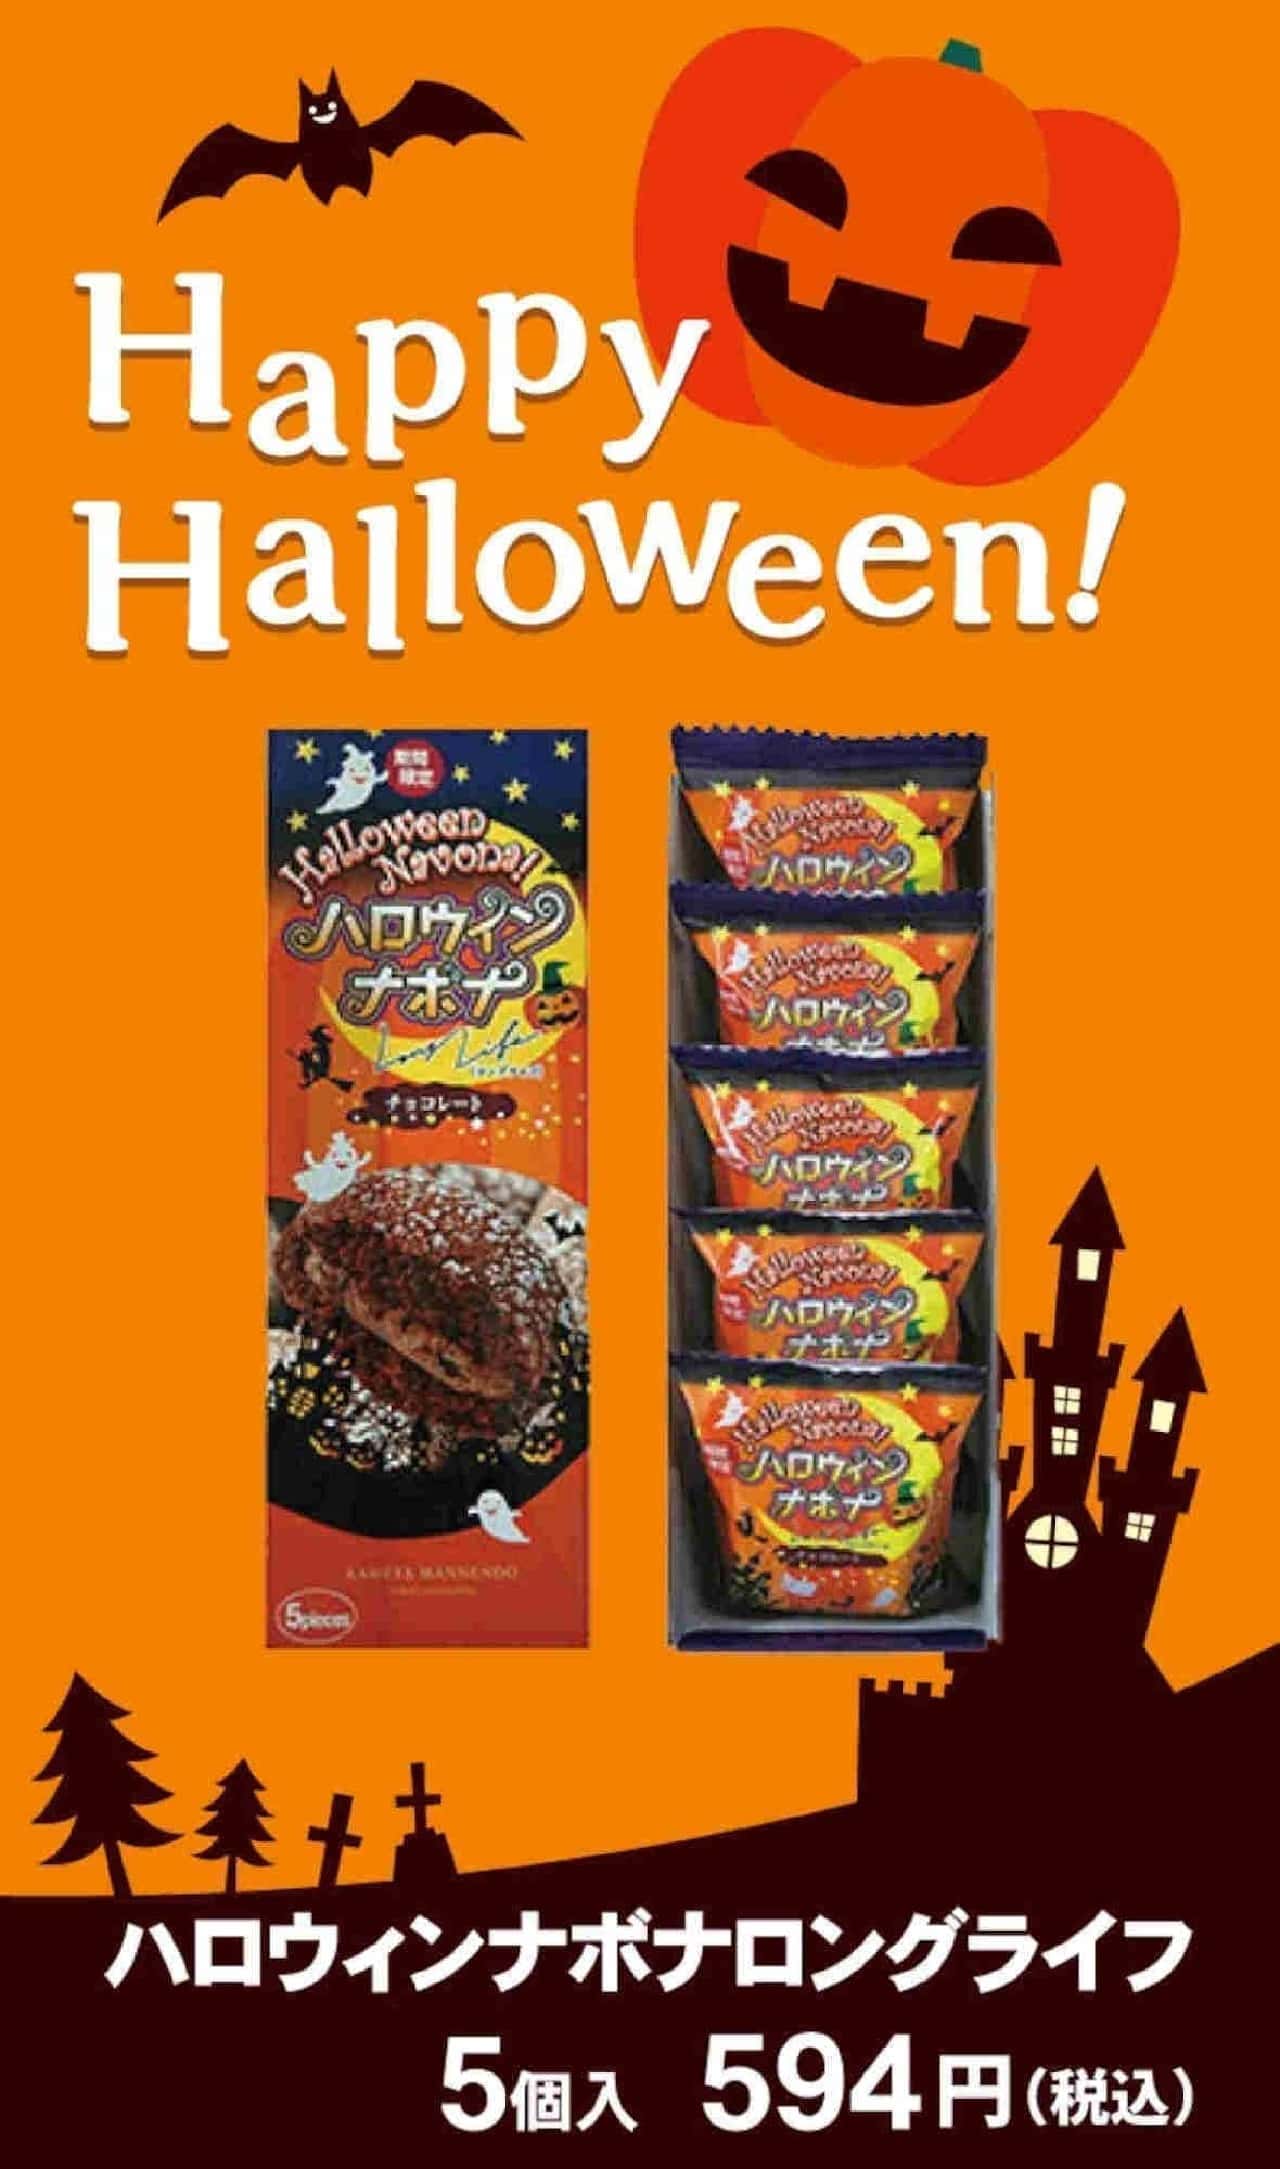 Halloween package for Western confectionery "Navona"